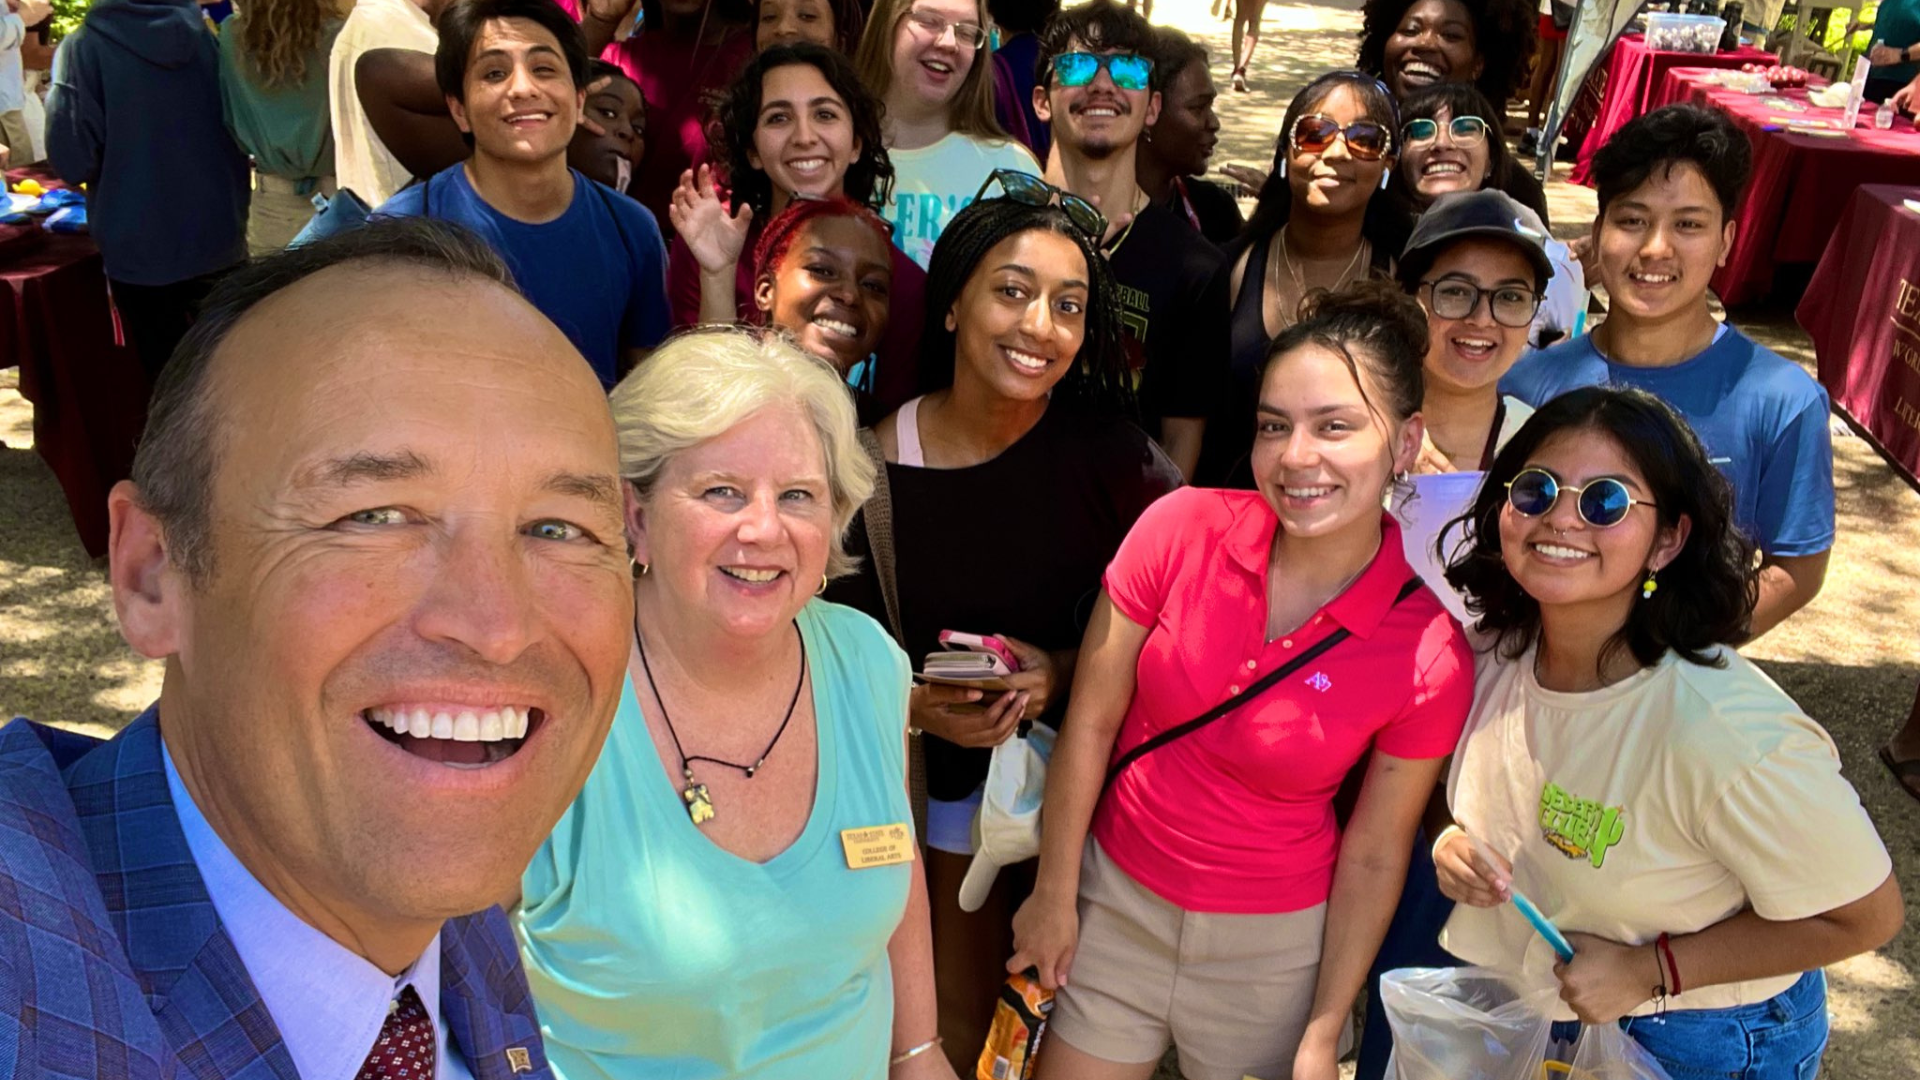 President Damphousse takes a selfie with a group of Bobcat community members and students. 